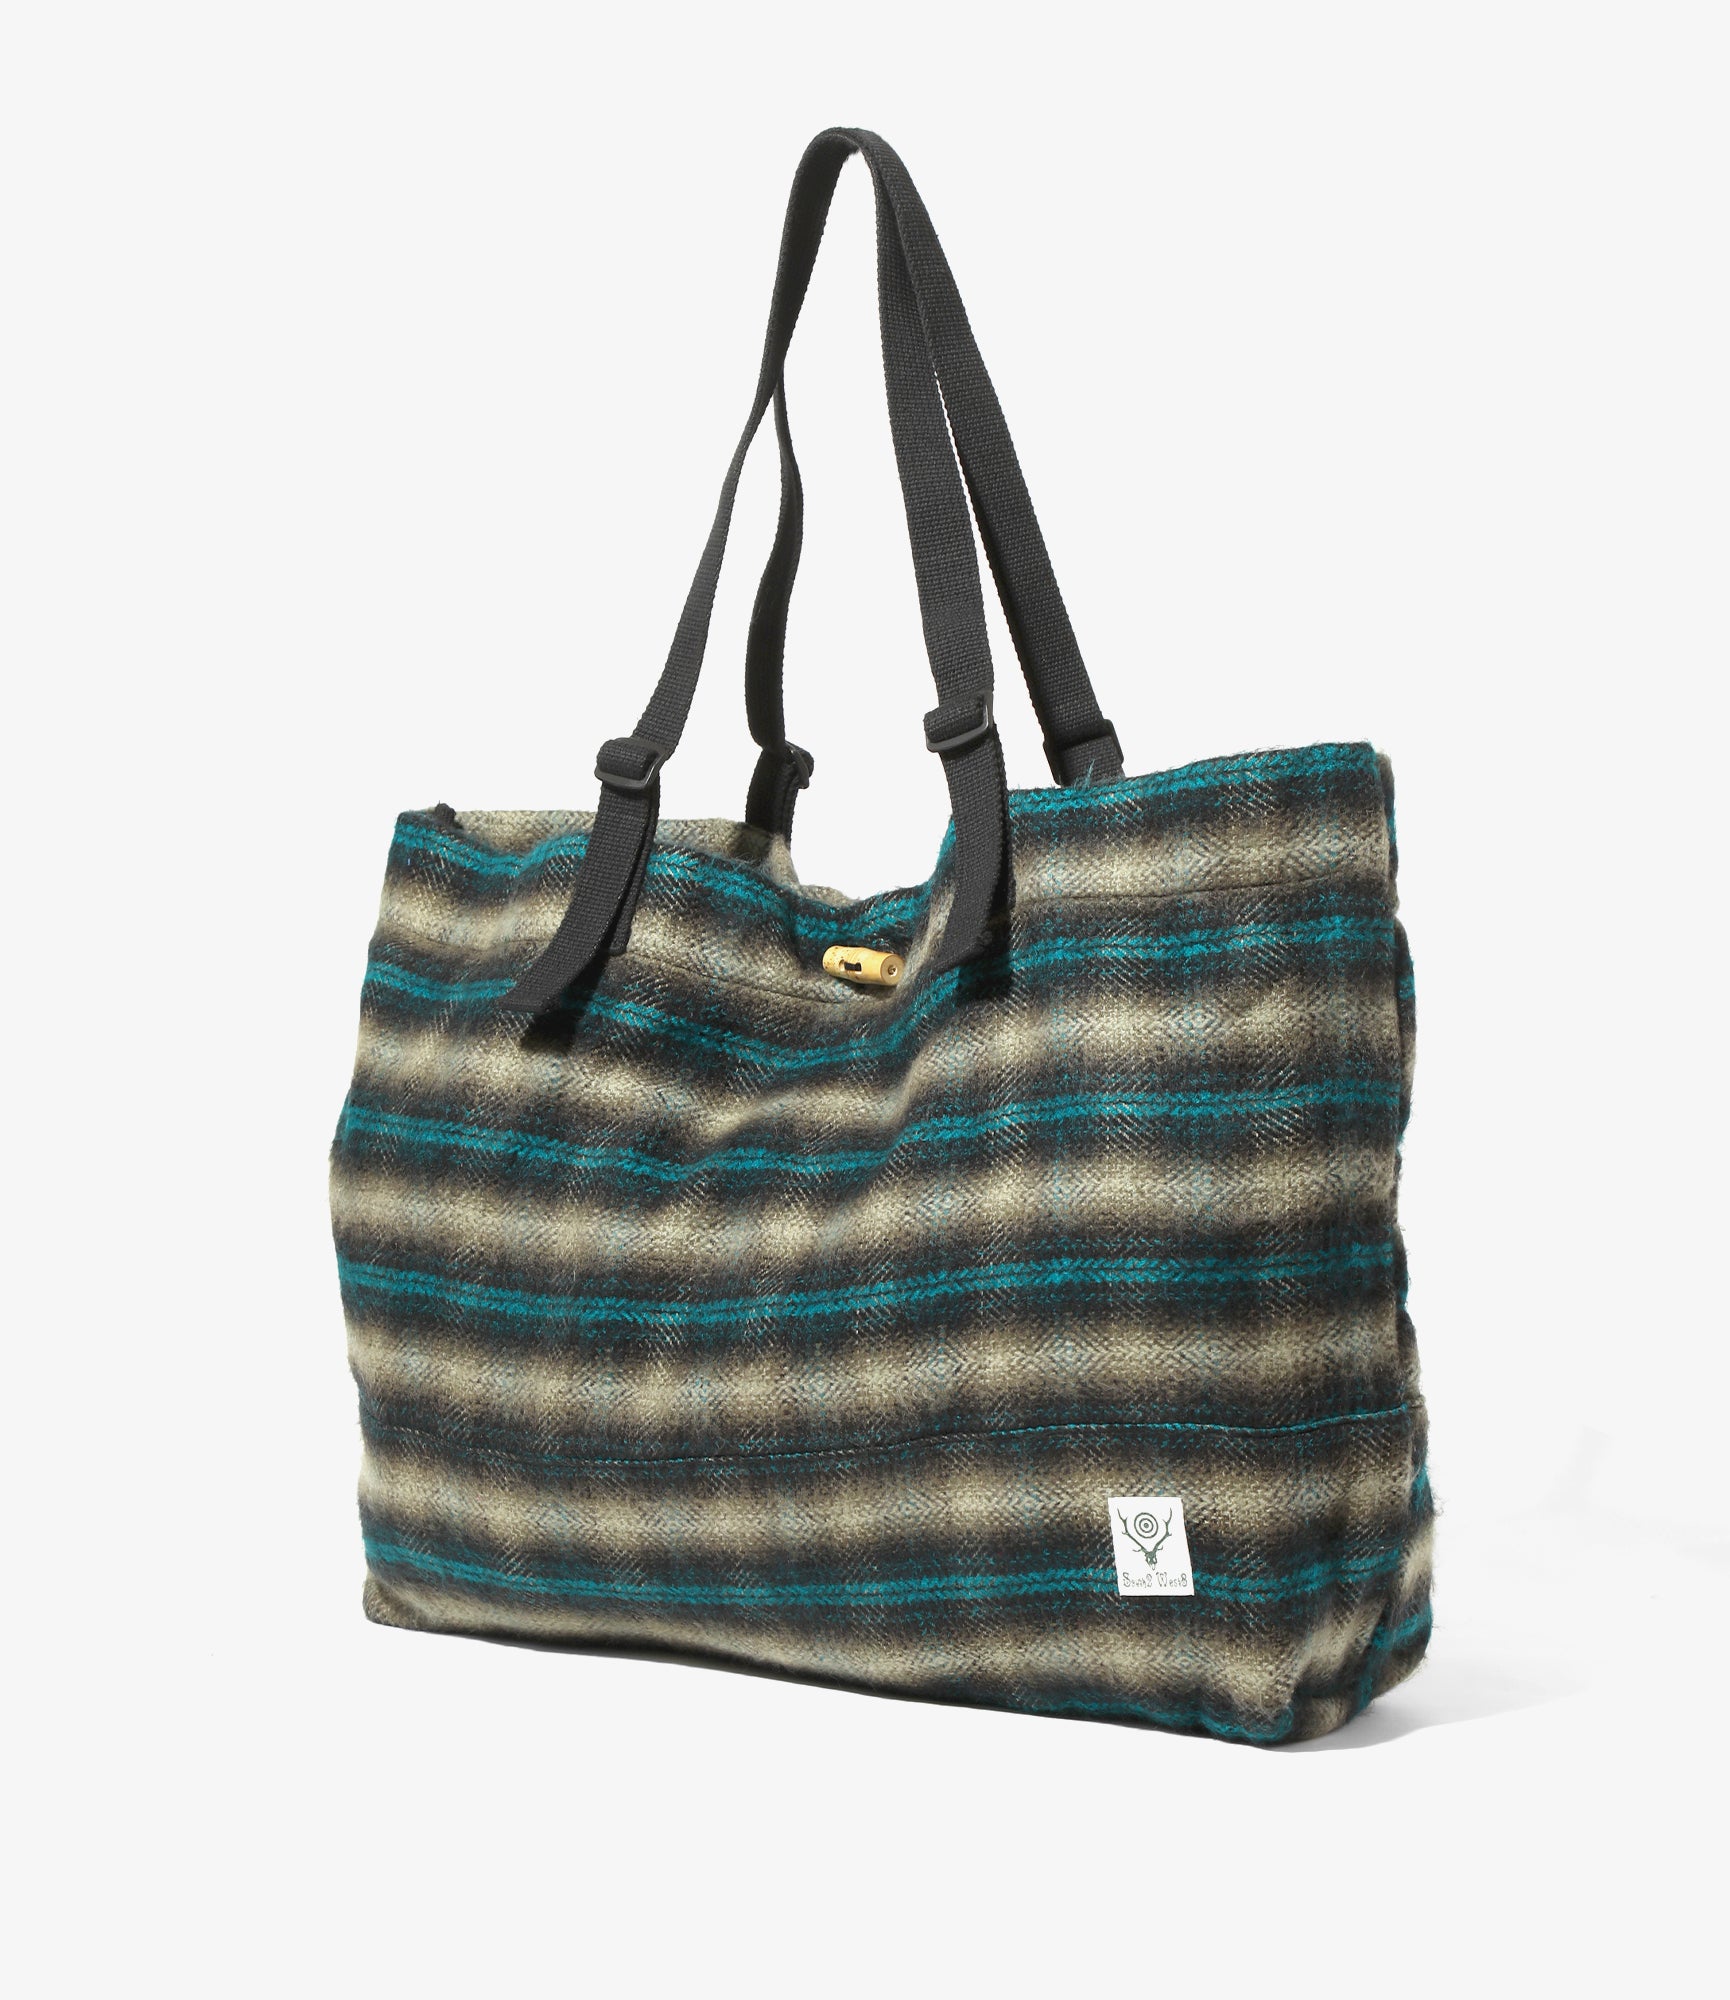 South2 West8 Canal Park Tote - Acrylic Plaid - Emerald/Black